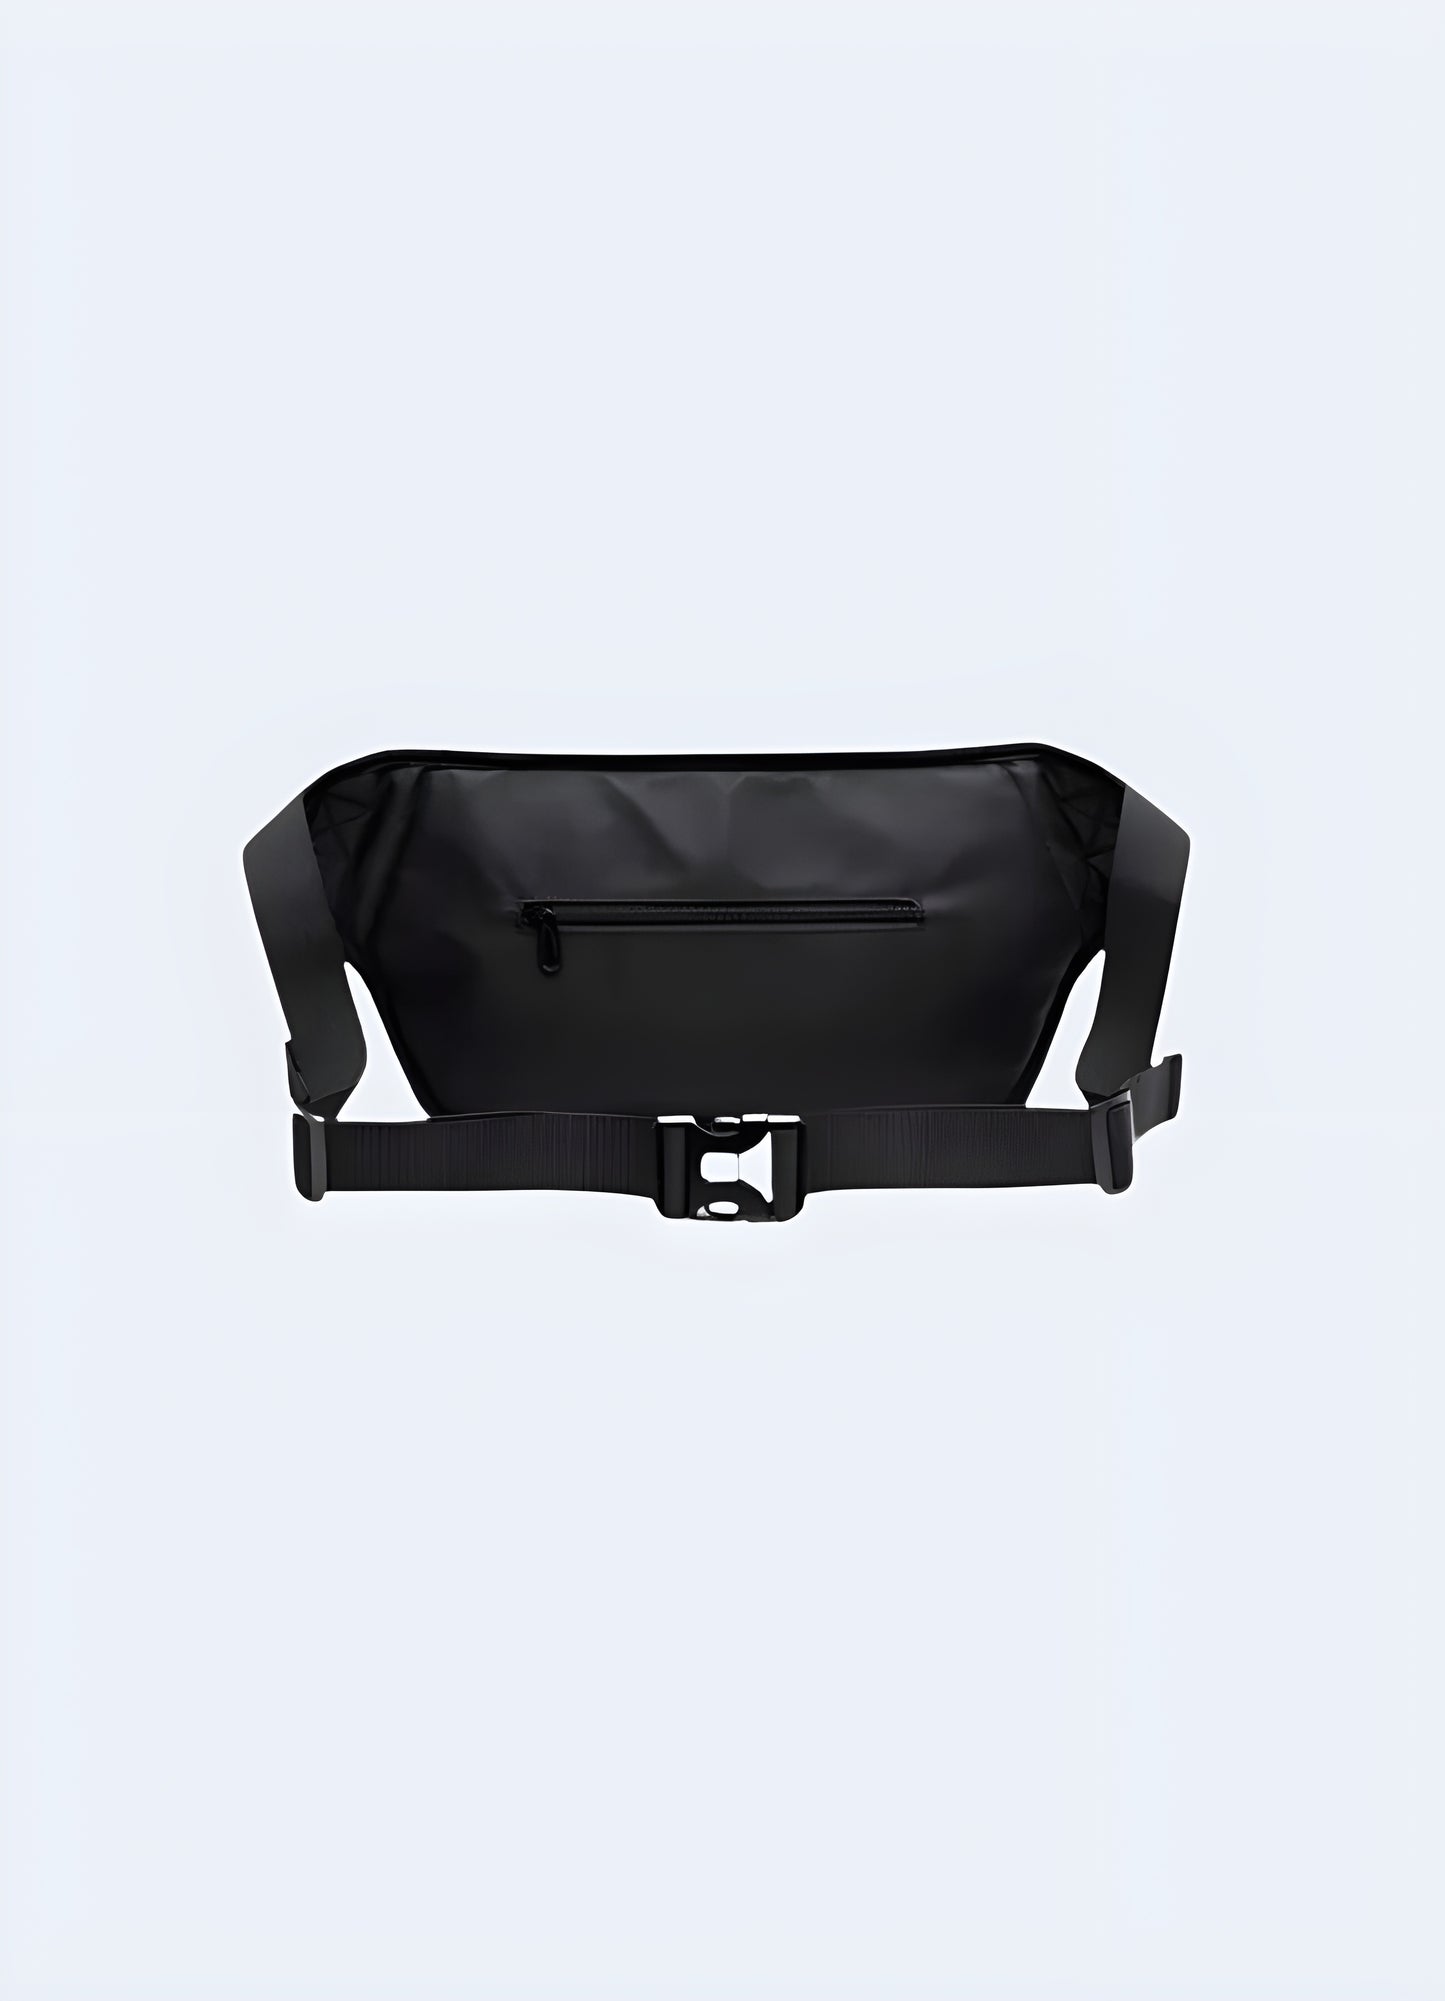 But it's the cutting-edge design inspired by techwear that sets this bag apart. 